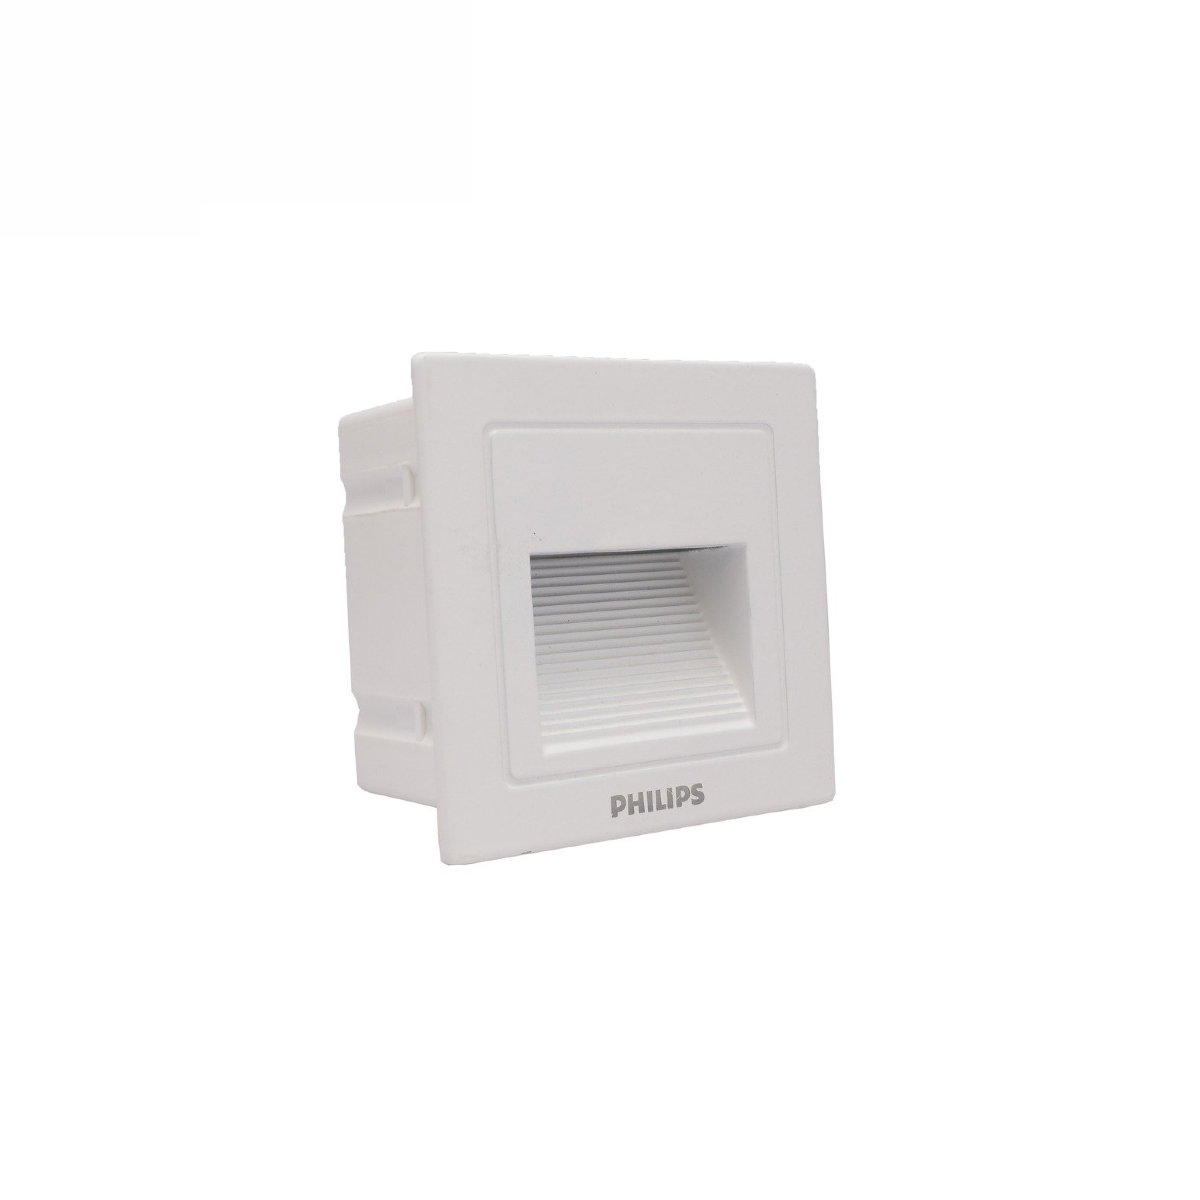 Philips Outdoor Recessed Step light